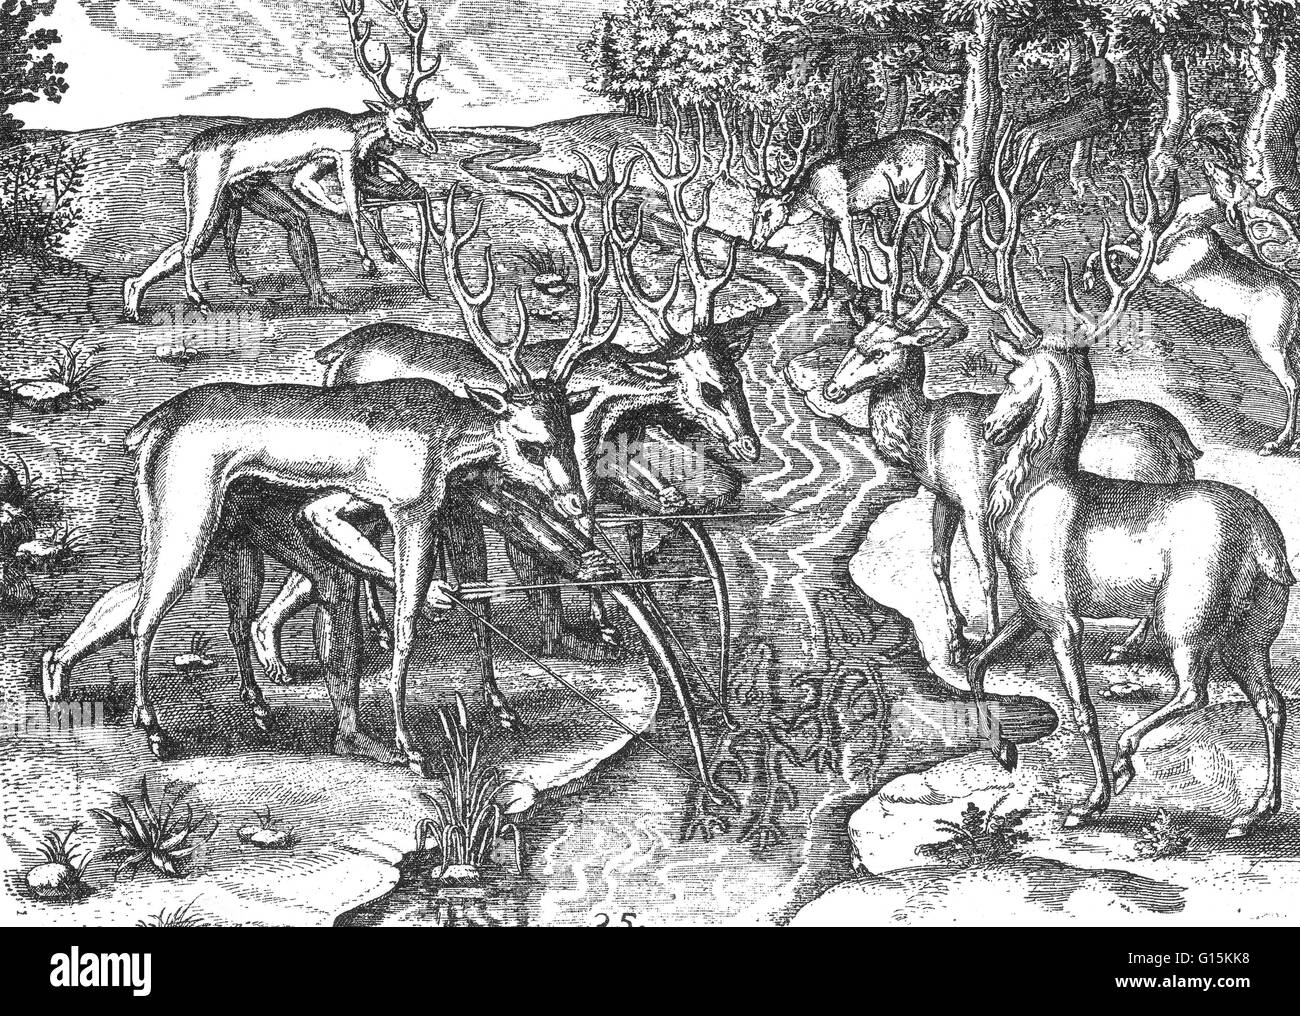 Florida Indians, disguised under deerskins, hunting deer. Image from Thomas Hariot's A Briefe and True Report of the Newfound Land of Virginia (1588), a first-person account by a scientist valuably enriched later with engravings by Theodor de Bry, 1590 af Stock Photo